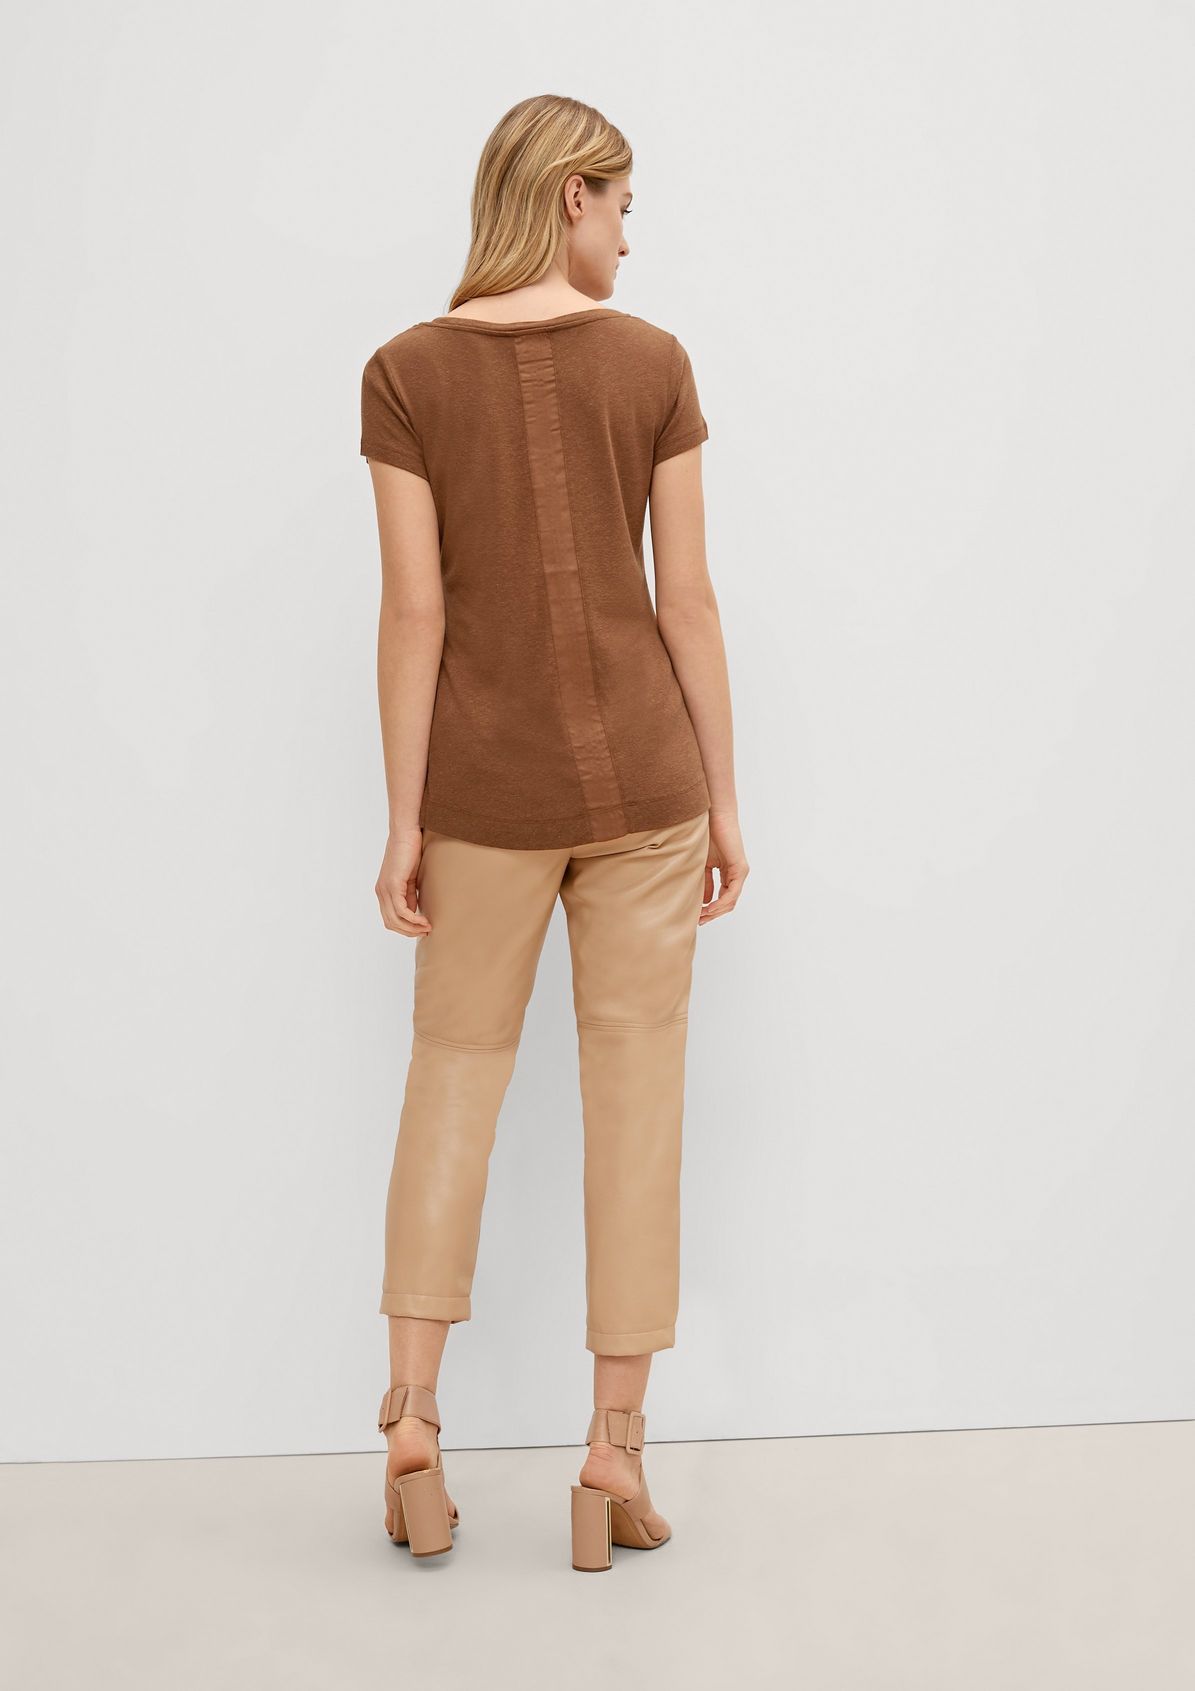 Round neck top made of fine knit fabric from comma